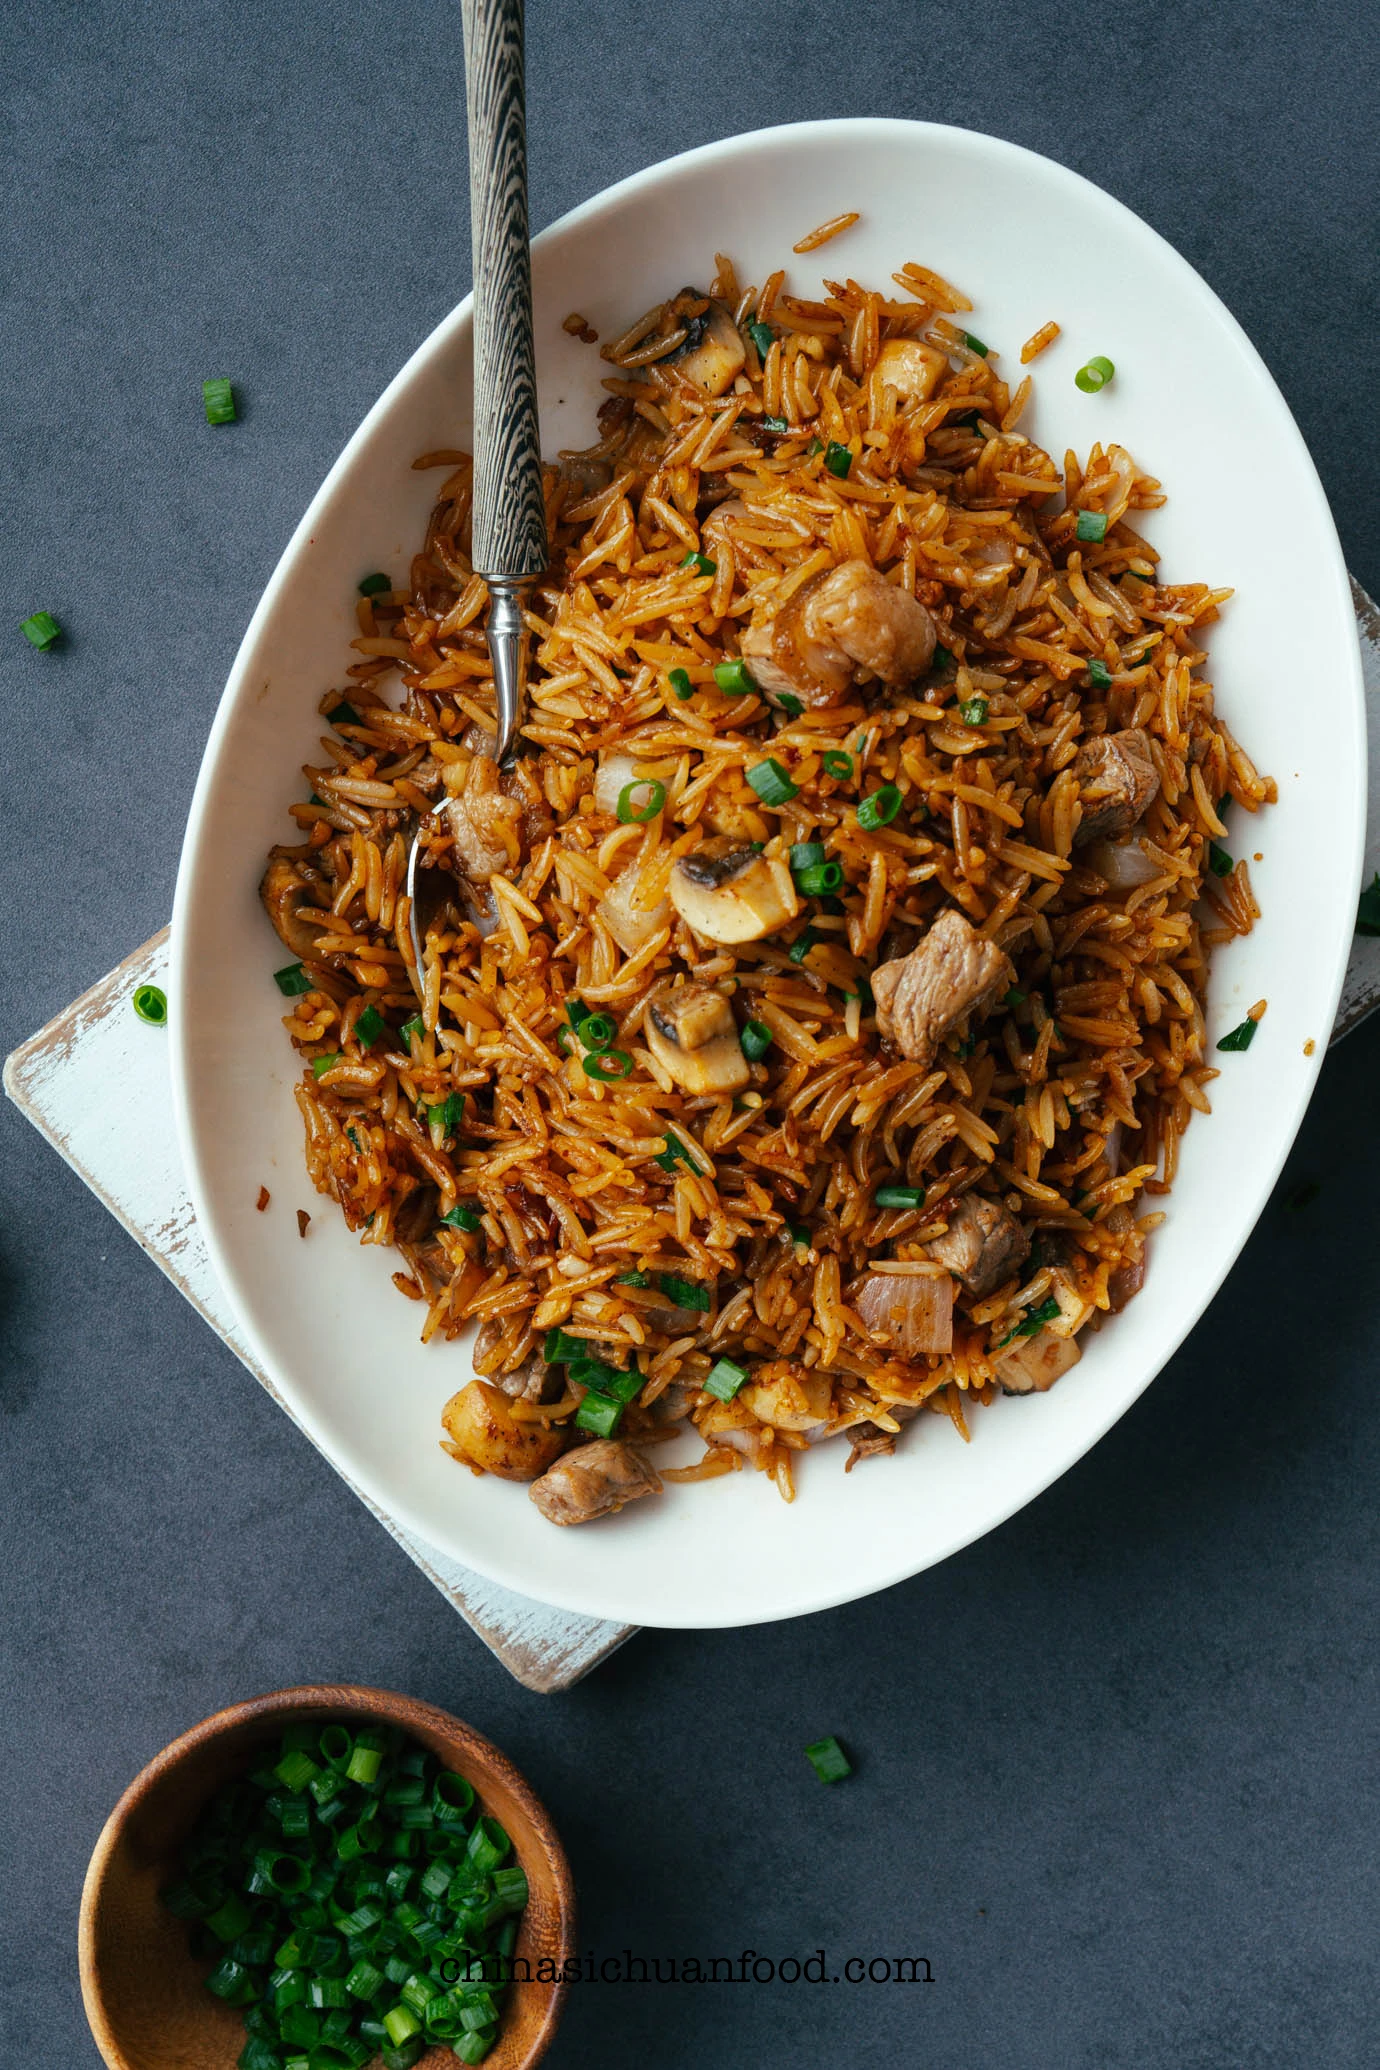 beef and button mushrooms fried rice | chinasichuanfood.com